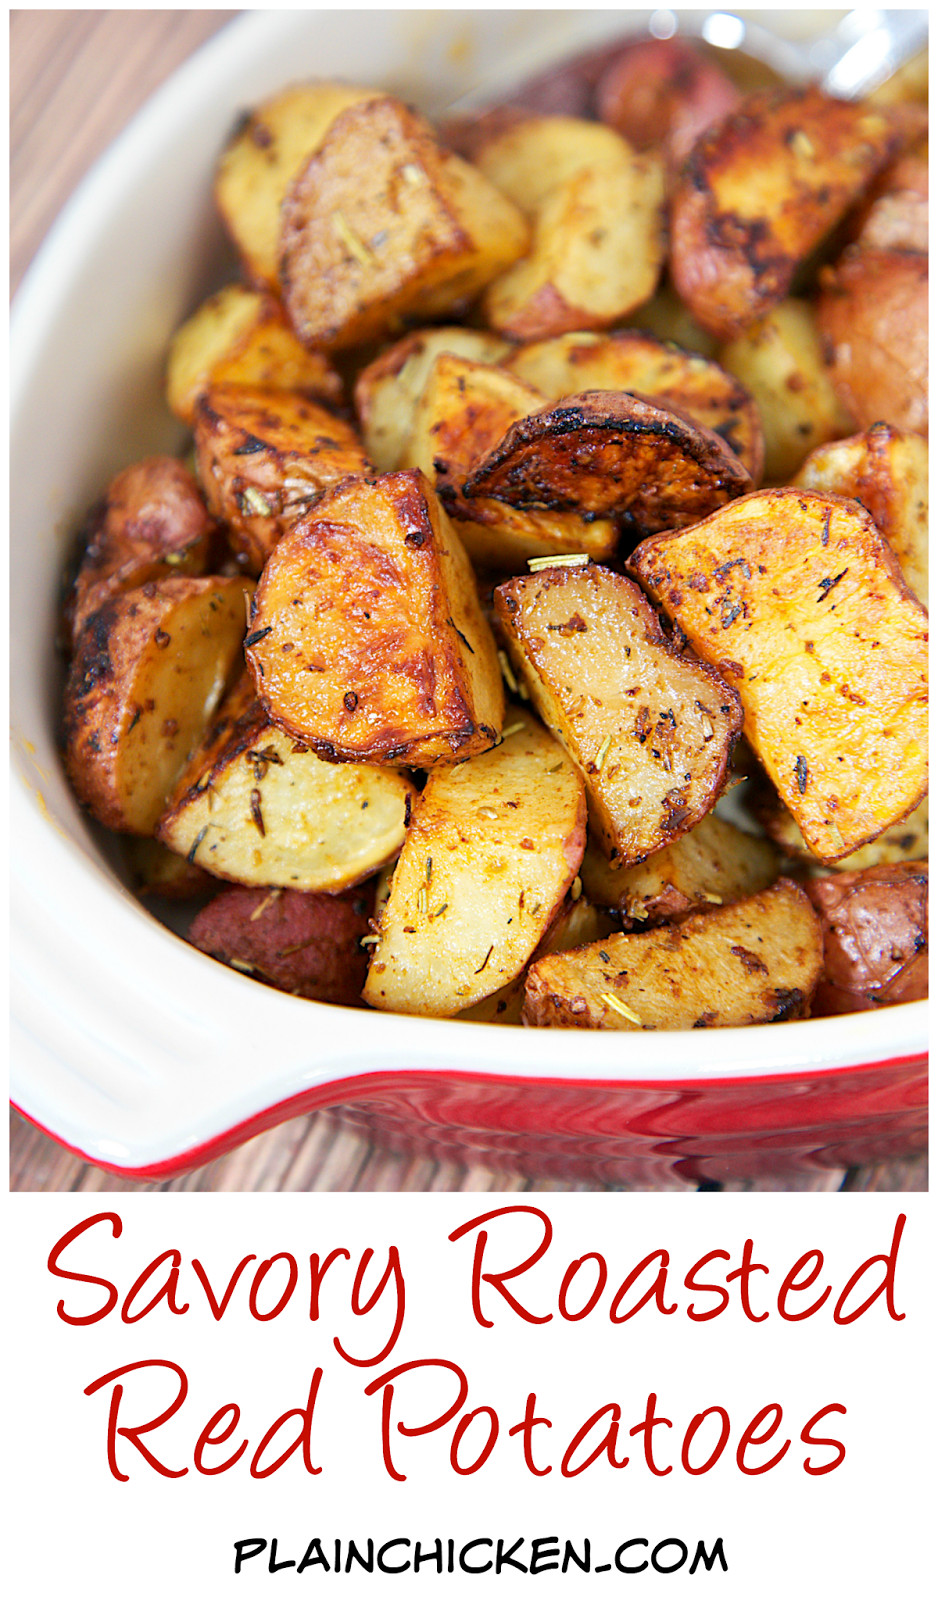 Roasted Red Potatoes
 Savory Roasted Red Potatoes